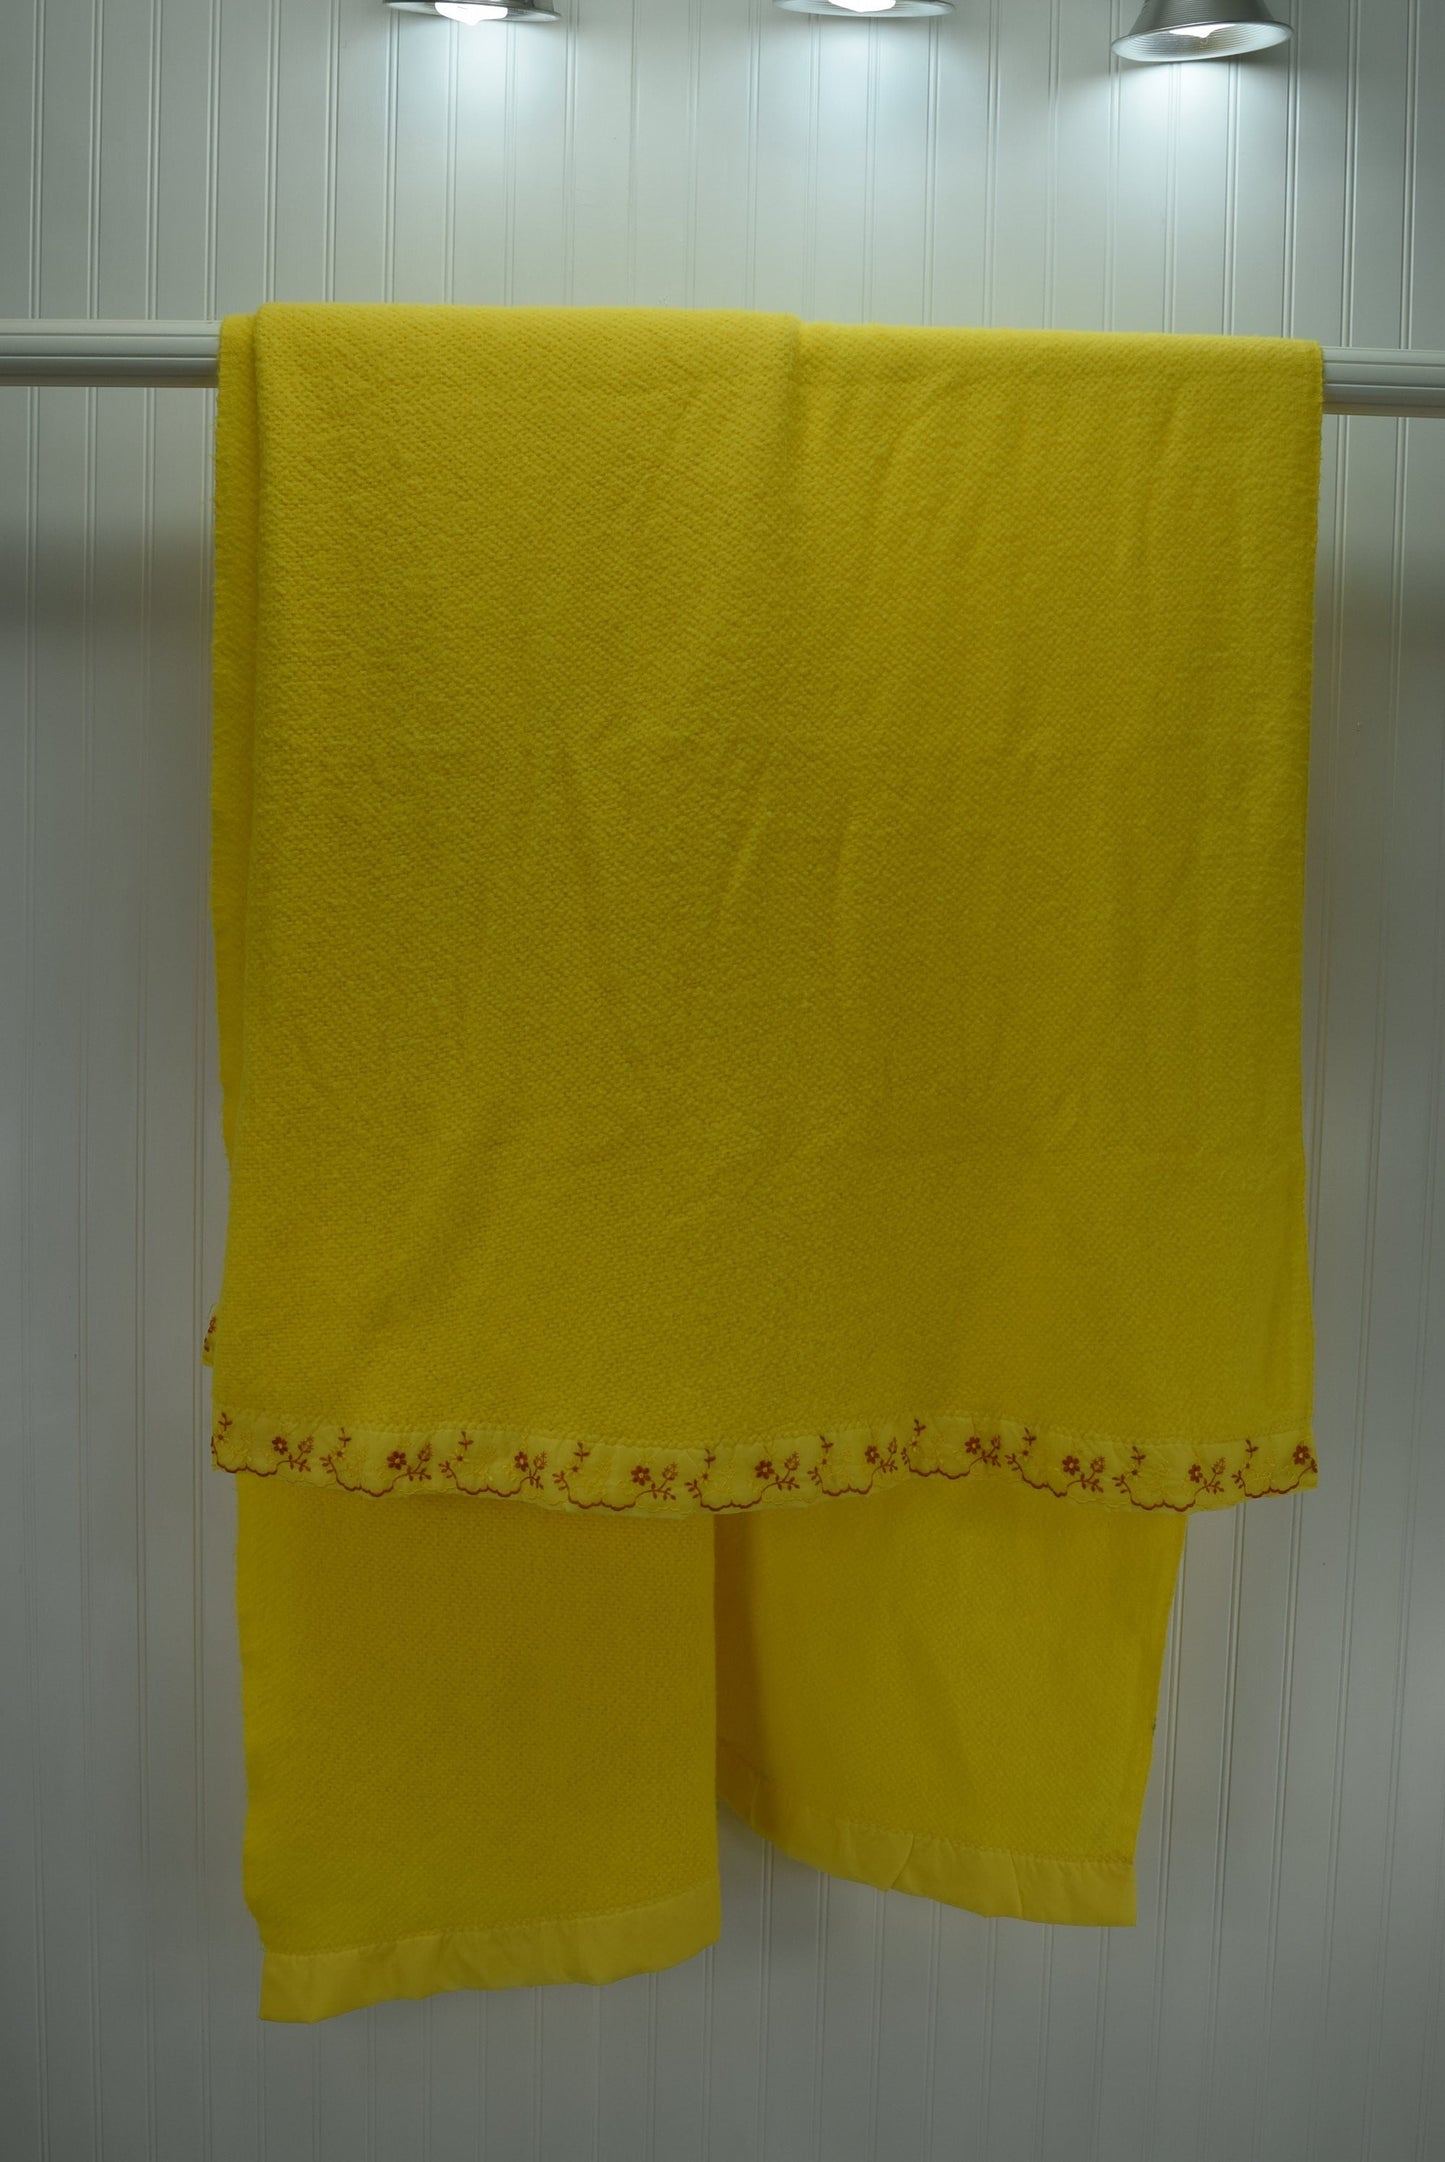 Acrylic Thermal Blanket for sale Lemon Yellow with Embroidered Binding Retro Bedding mid century